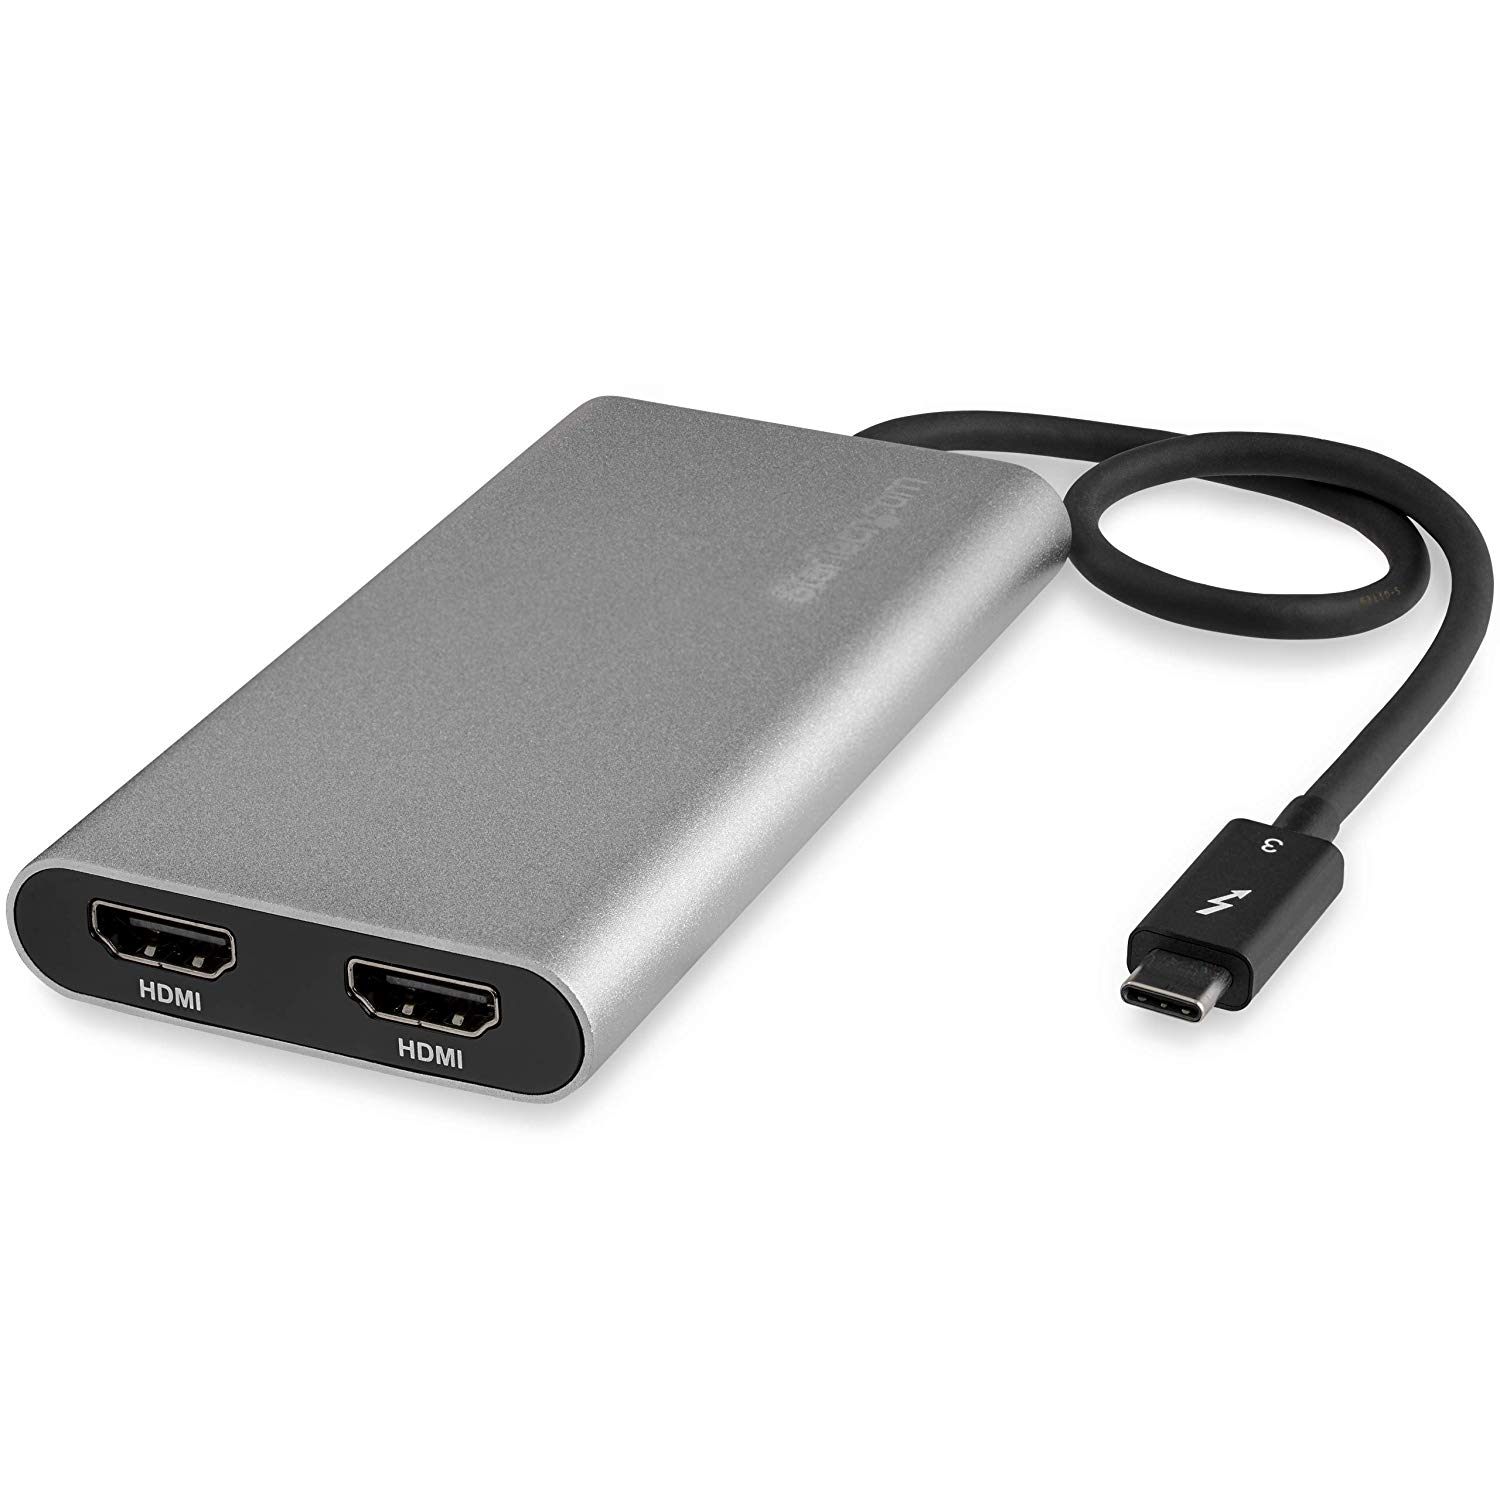 thunderbolt 2 to dual hdmi adapter